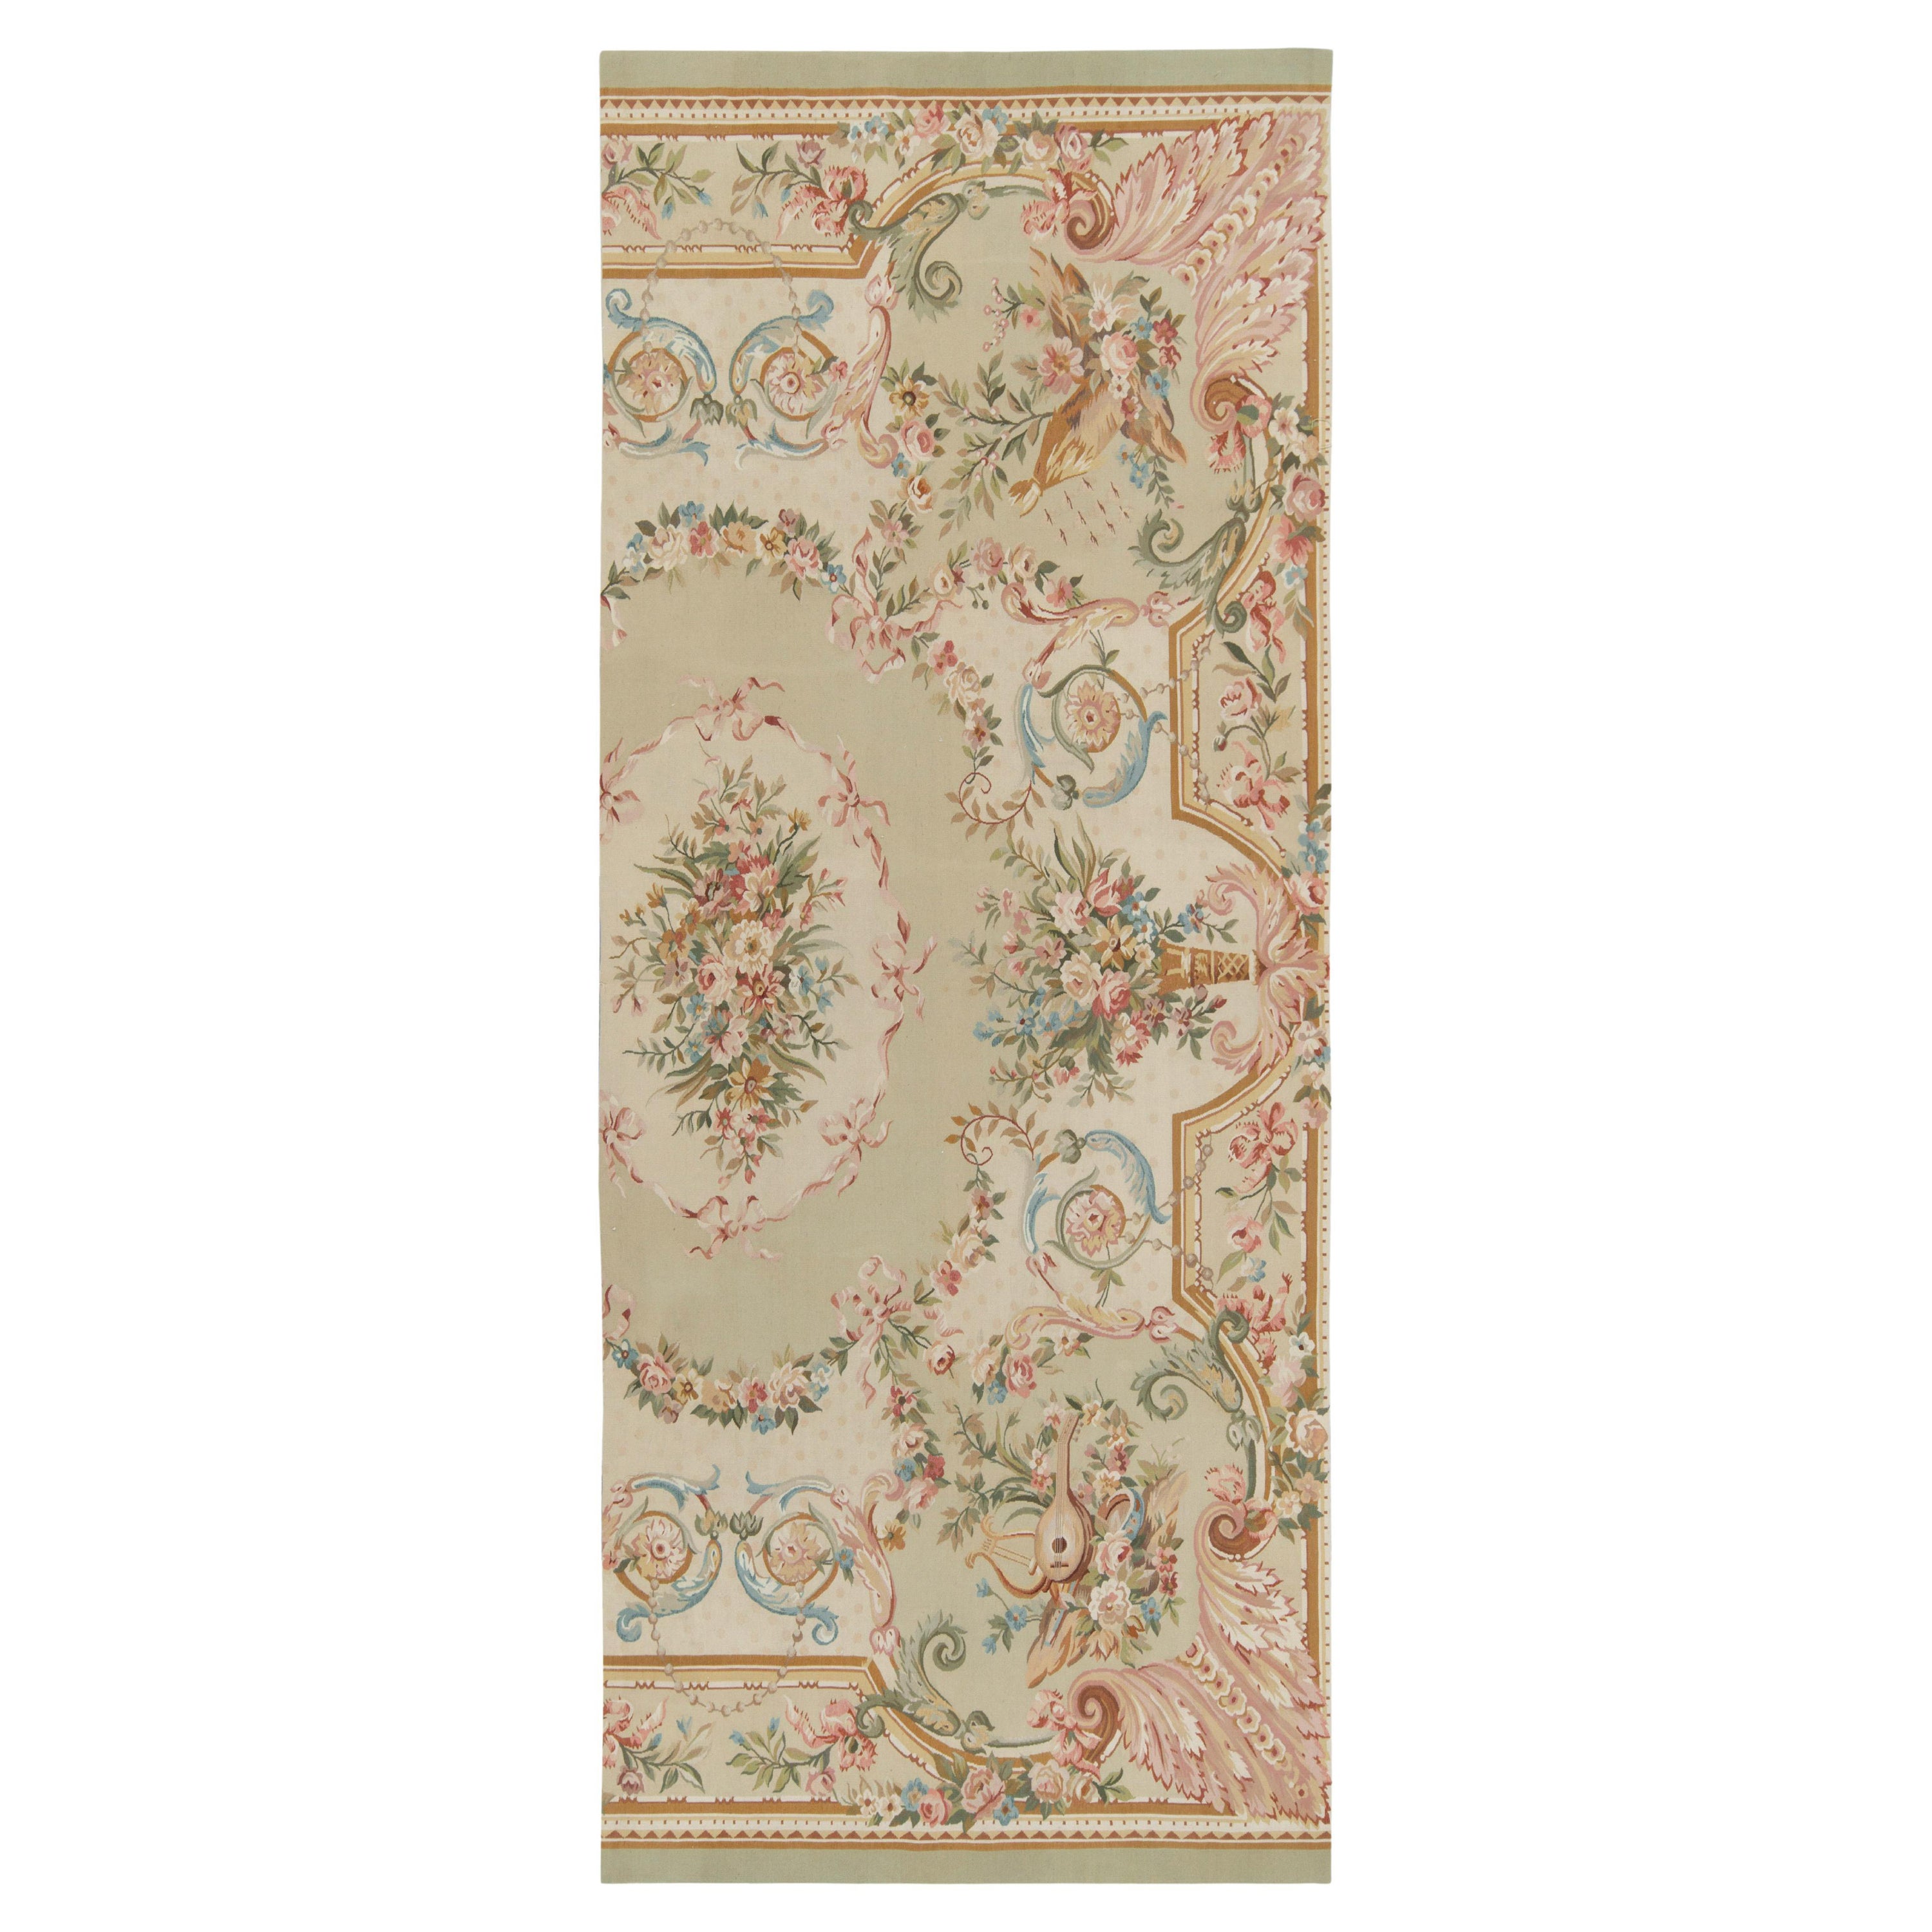 Rug & Kilim's Handwoven Aubusson Flat Weave Style Green, Pink, Beige Floral Rug For Sale